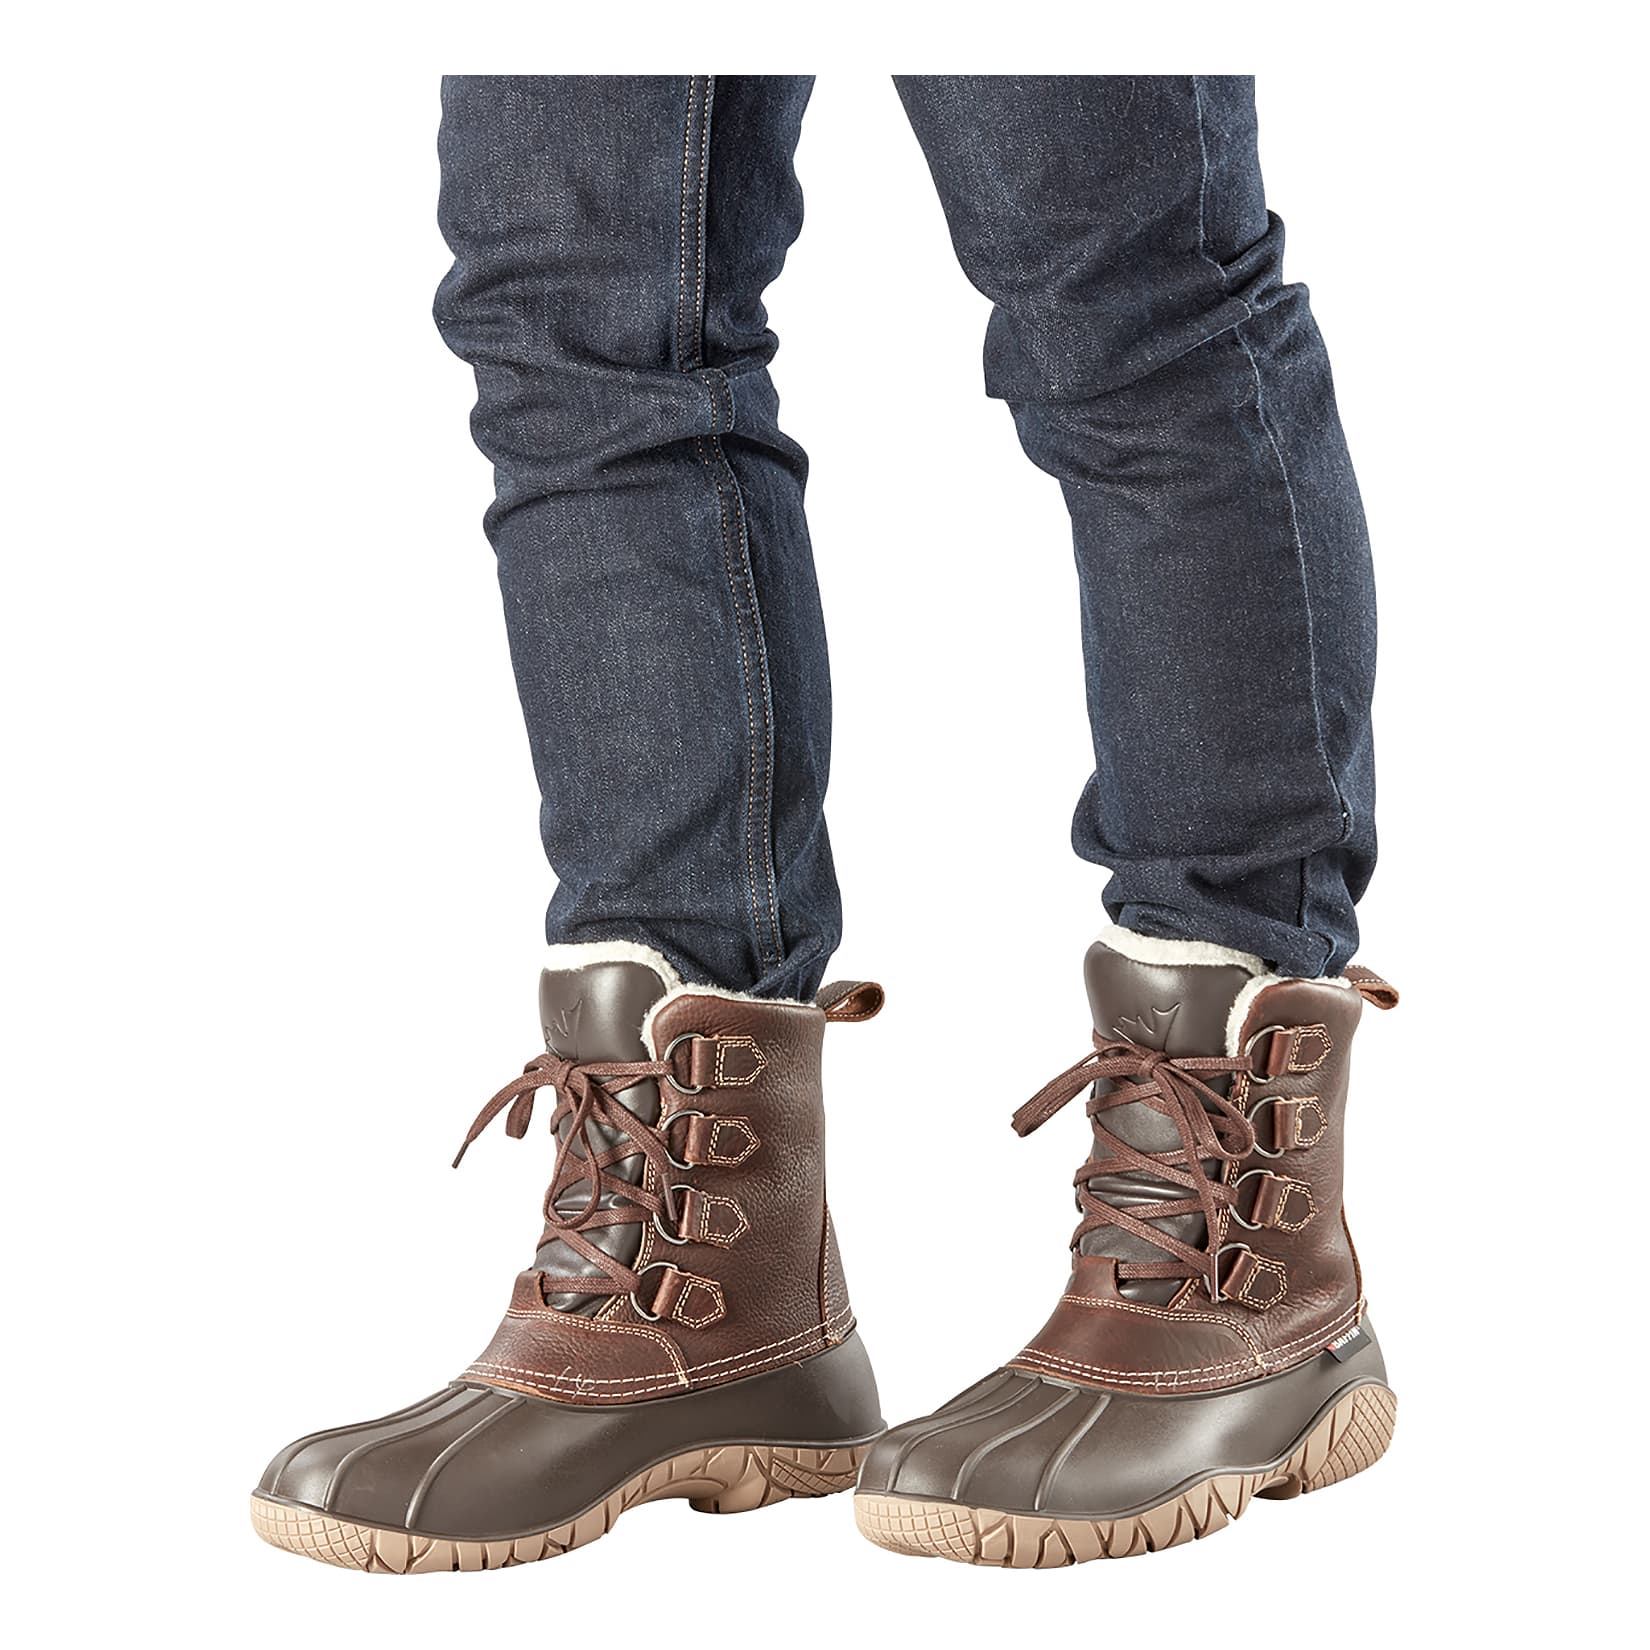 Baffin® Men’s Yellowknife Winter Boot - in use